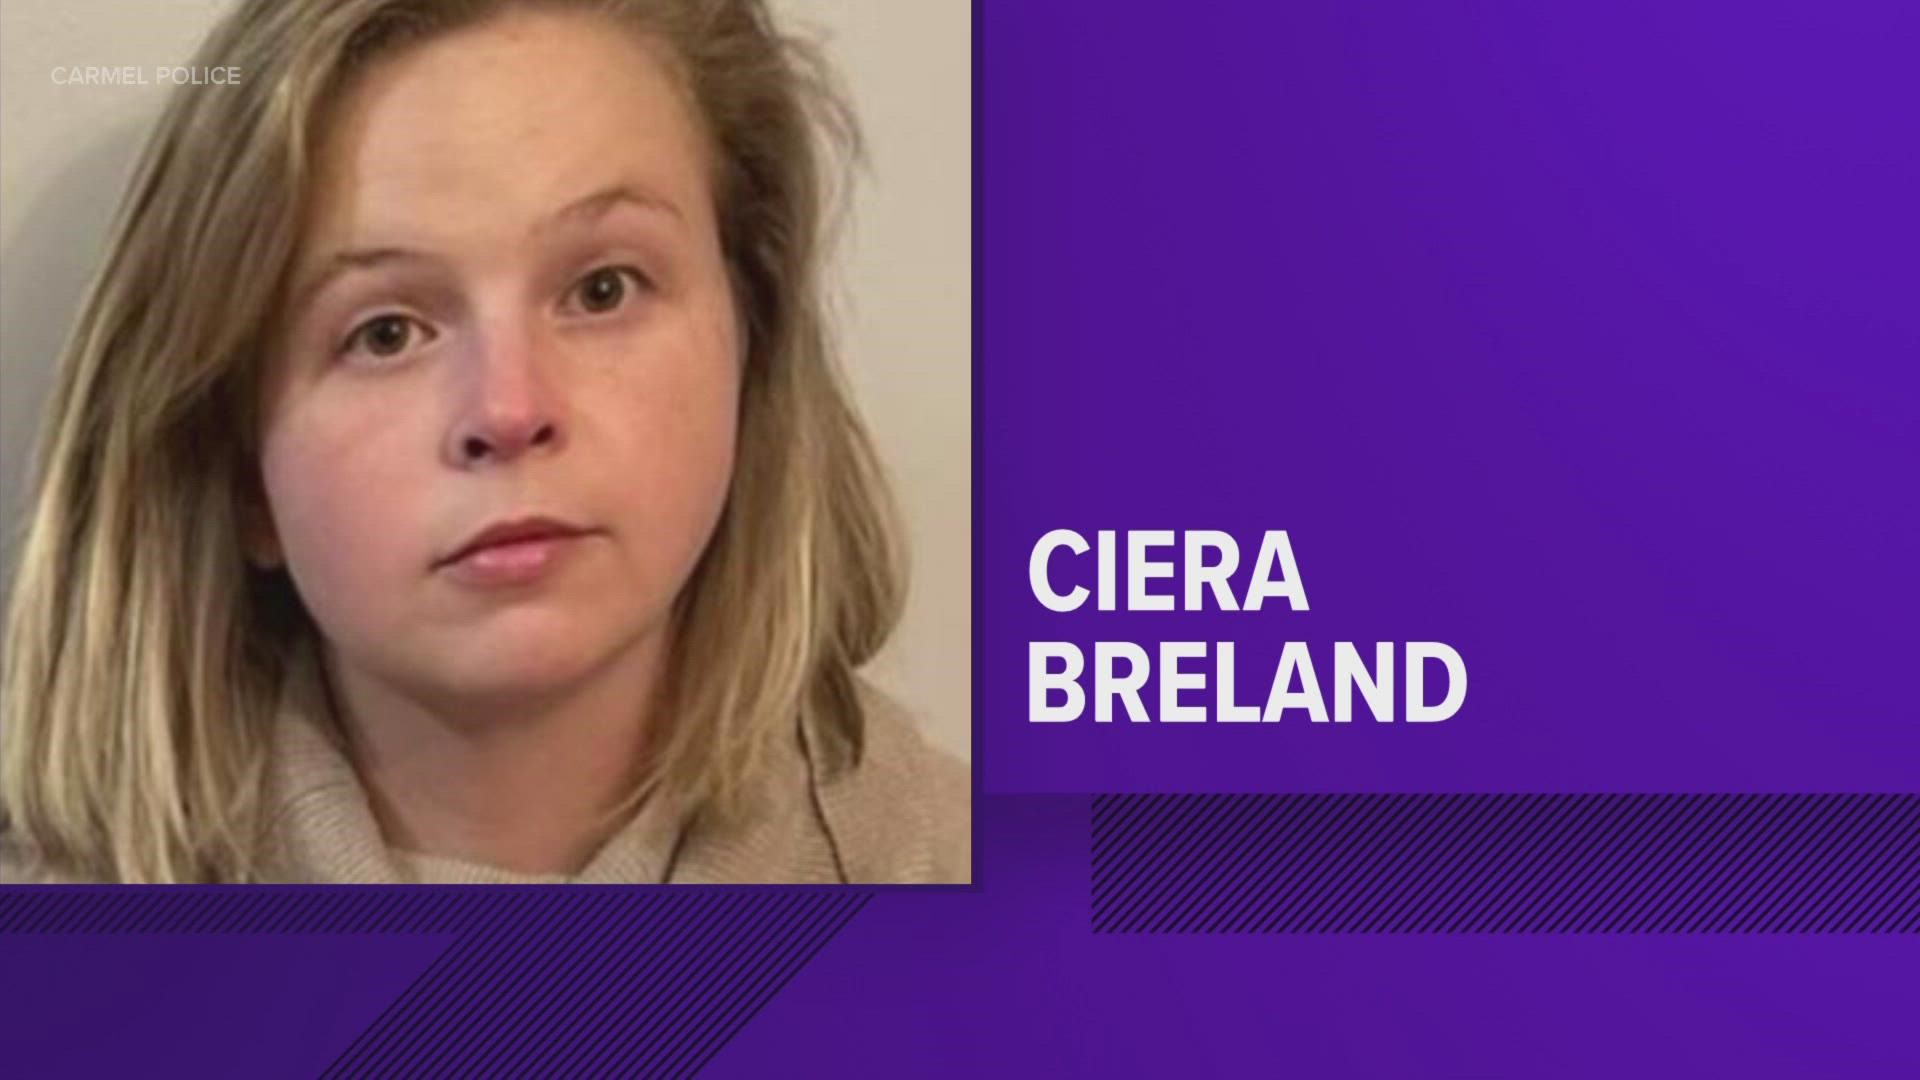 Ciera Breland (Locklair) has been missing since Feb. 24. Police identified her husband, Xavier Breland, as a person of interest.